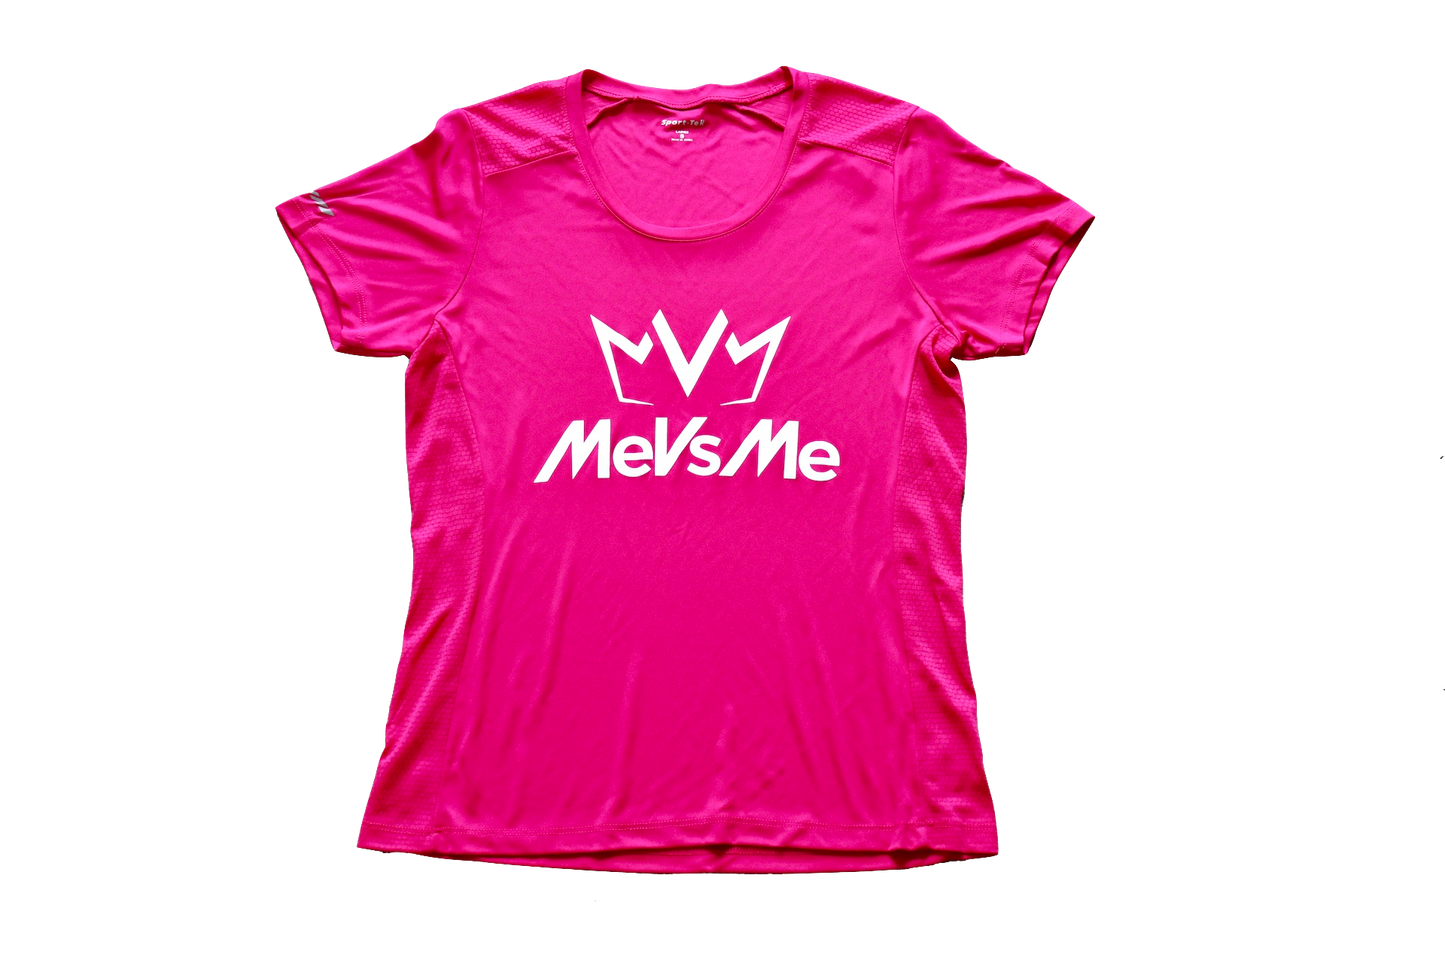 Frontside view of the pink Women's MVM Performance Tee with MeVsMe logos.